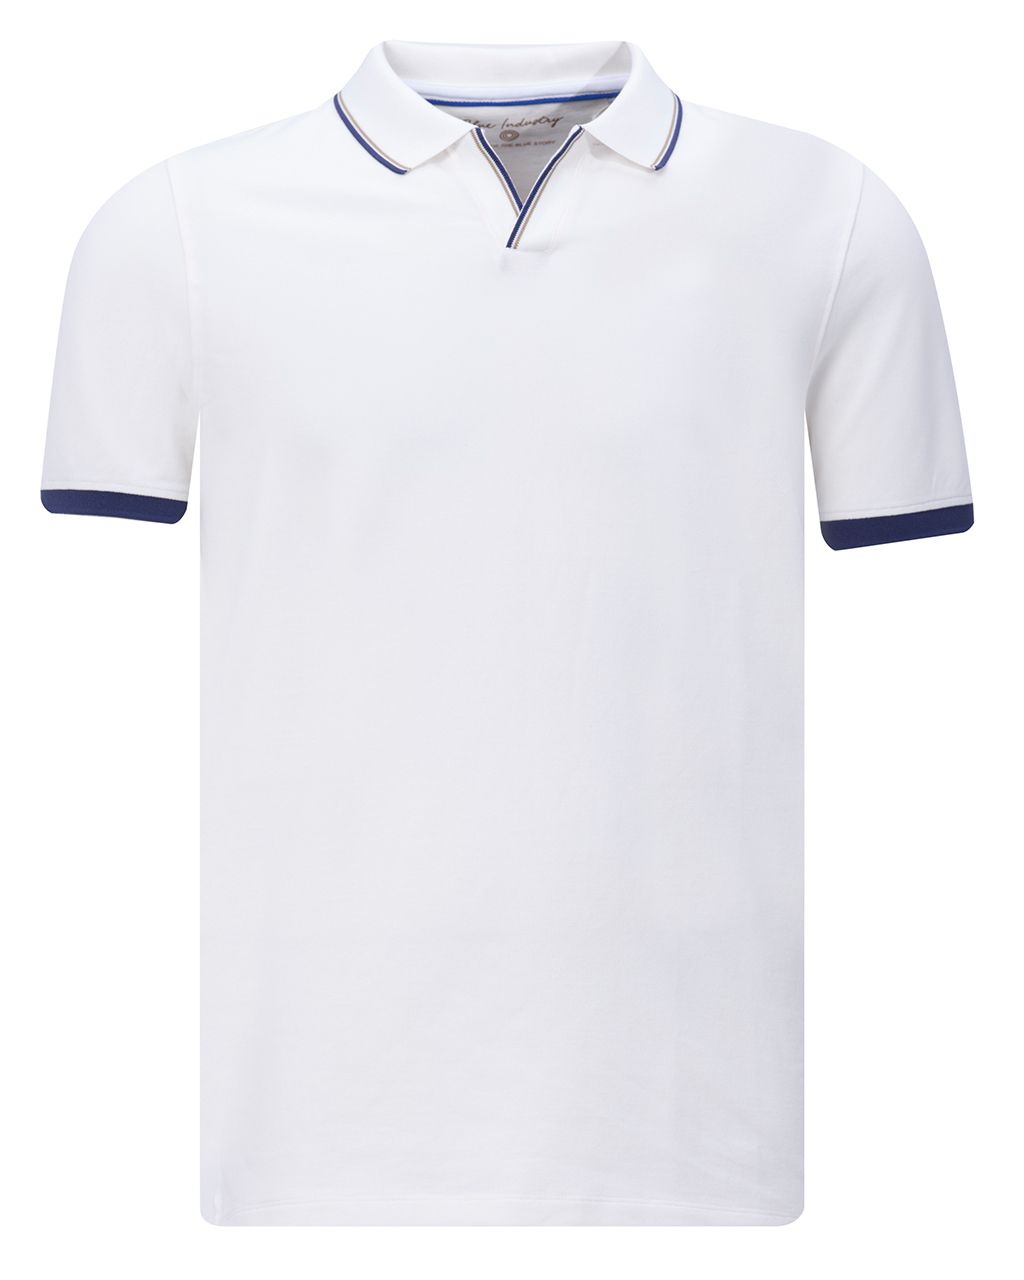 Blue Industry Polo KM Off white 078375-001-L